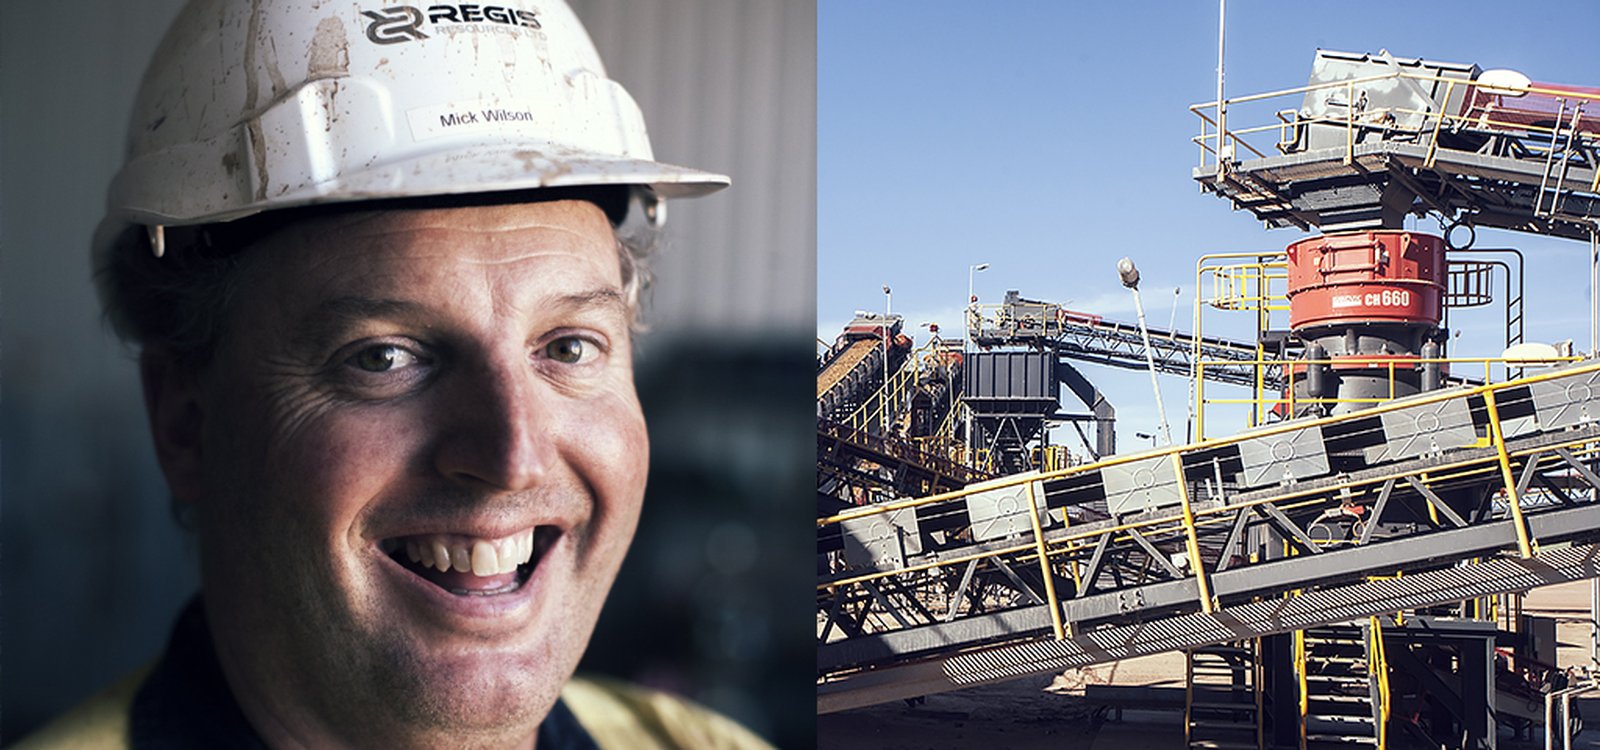 Mick Wilson, maintenance superintendent, Regis Resources, has extensive experience in the mining industry and is pleased with the safety aspects of the Sandvik equipment at the Rosemont plant. 